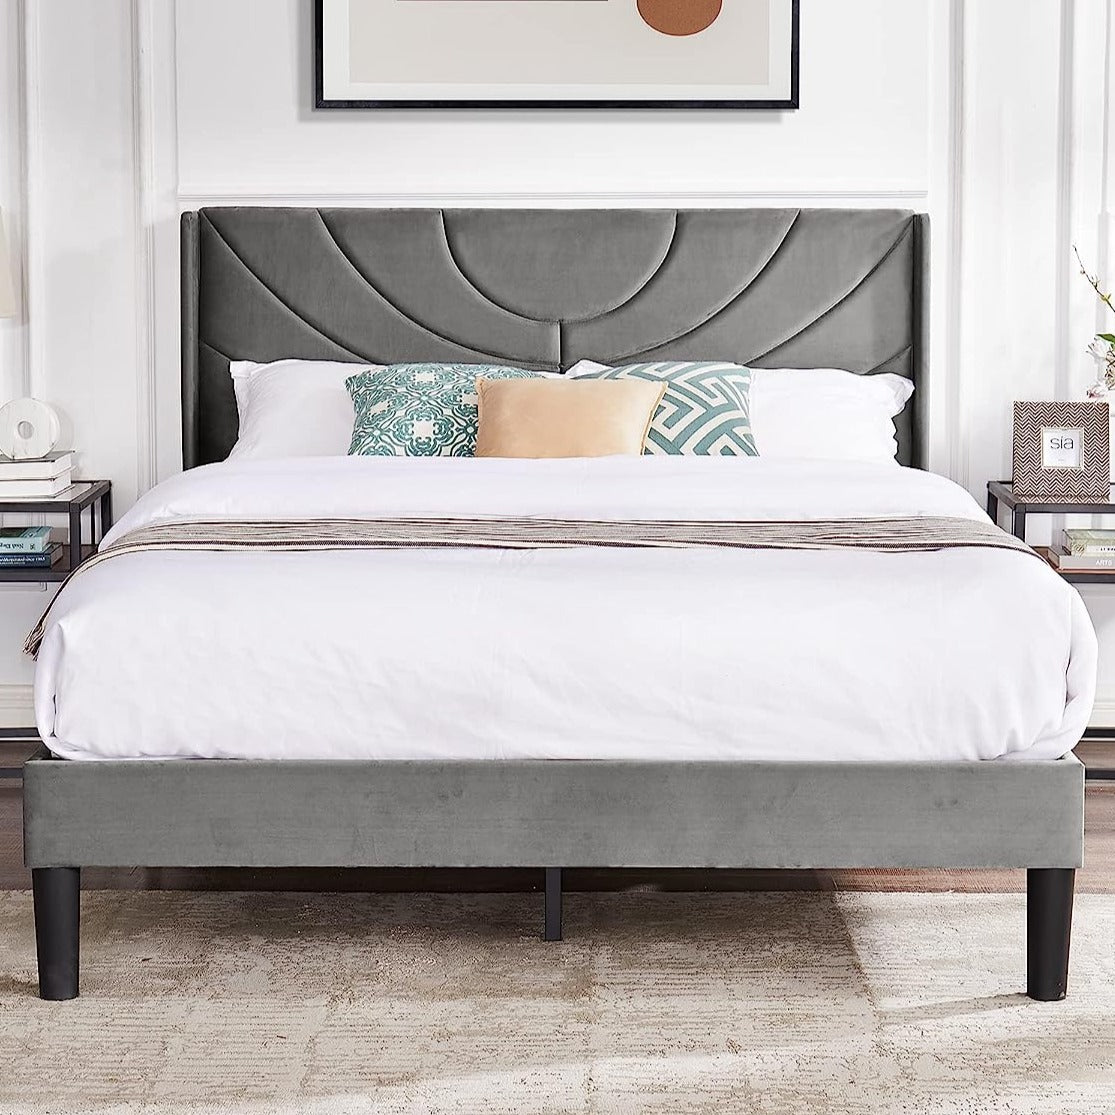 VECELO Upholstered Platform Bed Frame with Adjustable Fabric Headboard, Twin/Full/Queen size